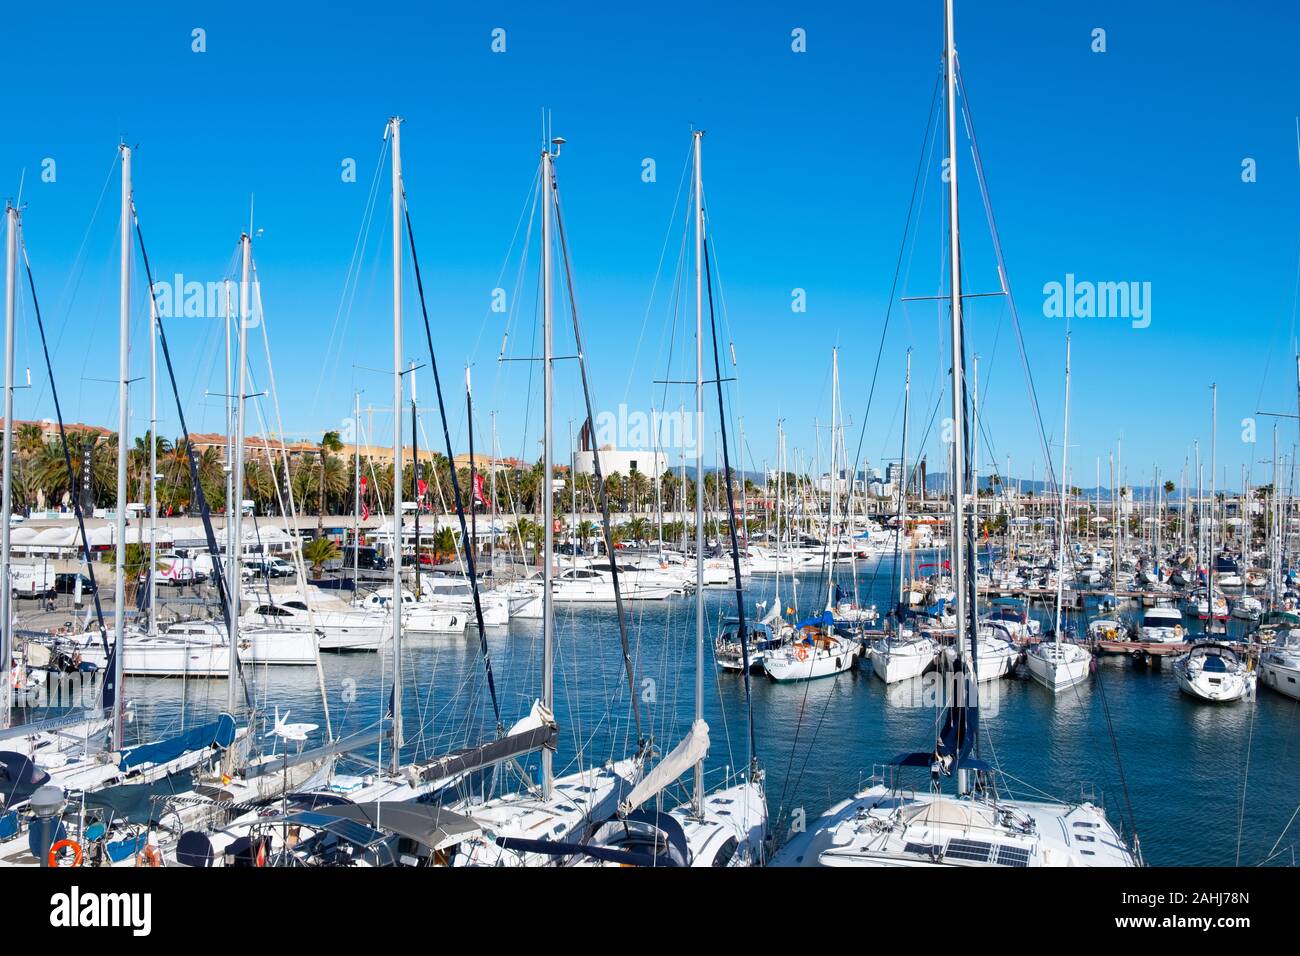 BARCELONA, SPAIN - DECEMBER 22, 2019: A view over the Port Olimpic marina in Barcelona, Spain, built in 1991 to host the sailing events for the 1992 S Stock Photo